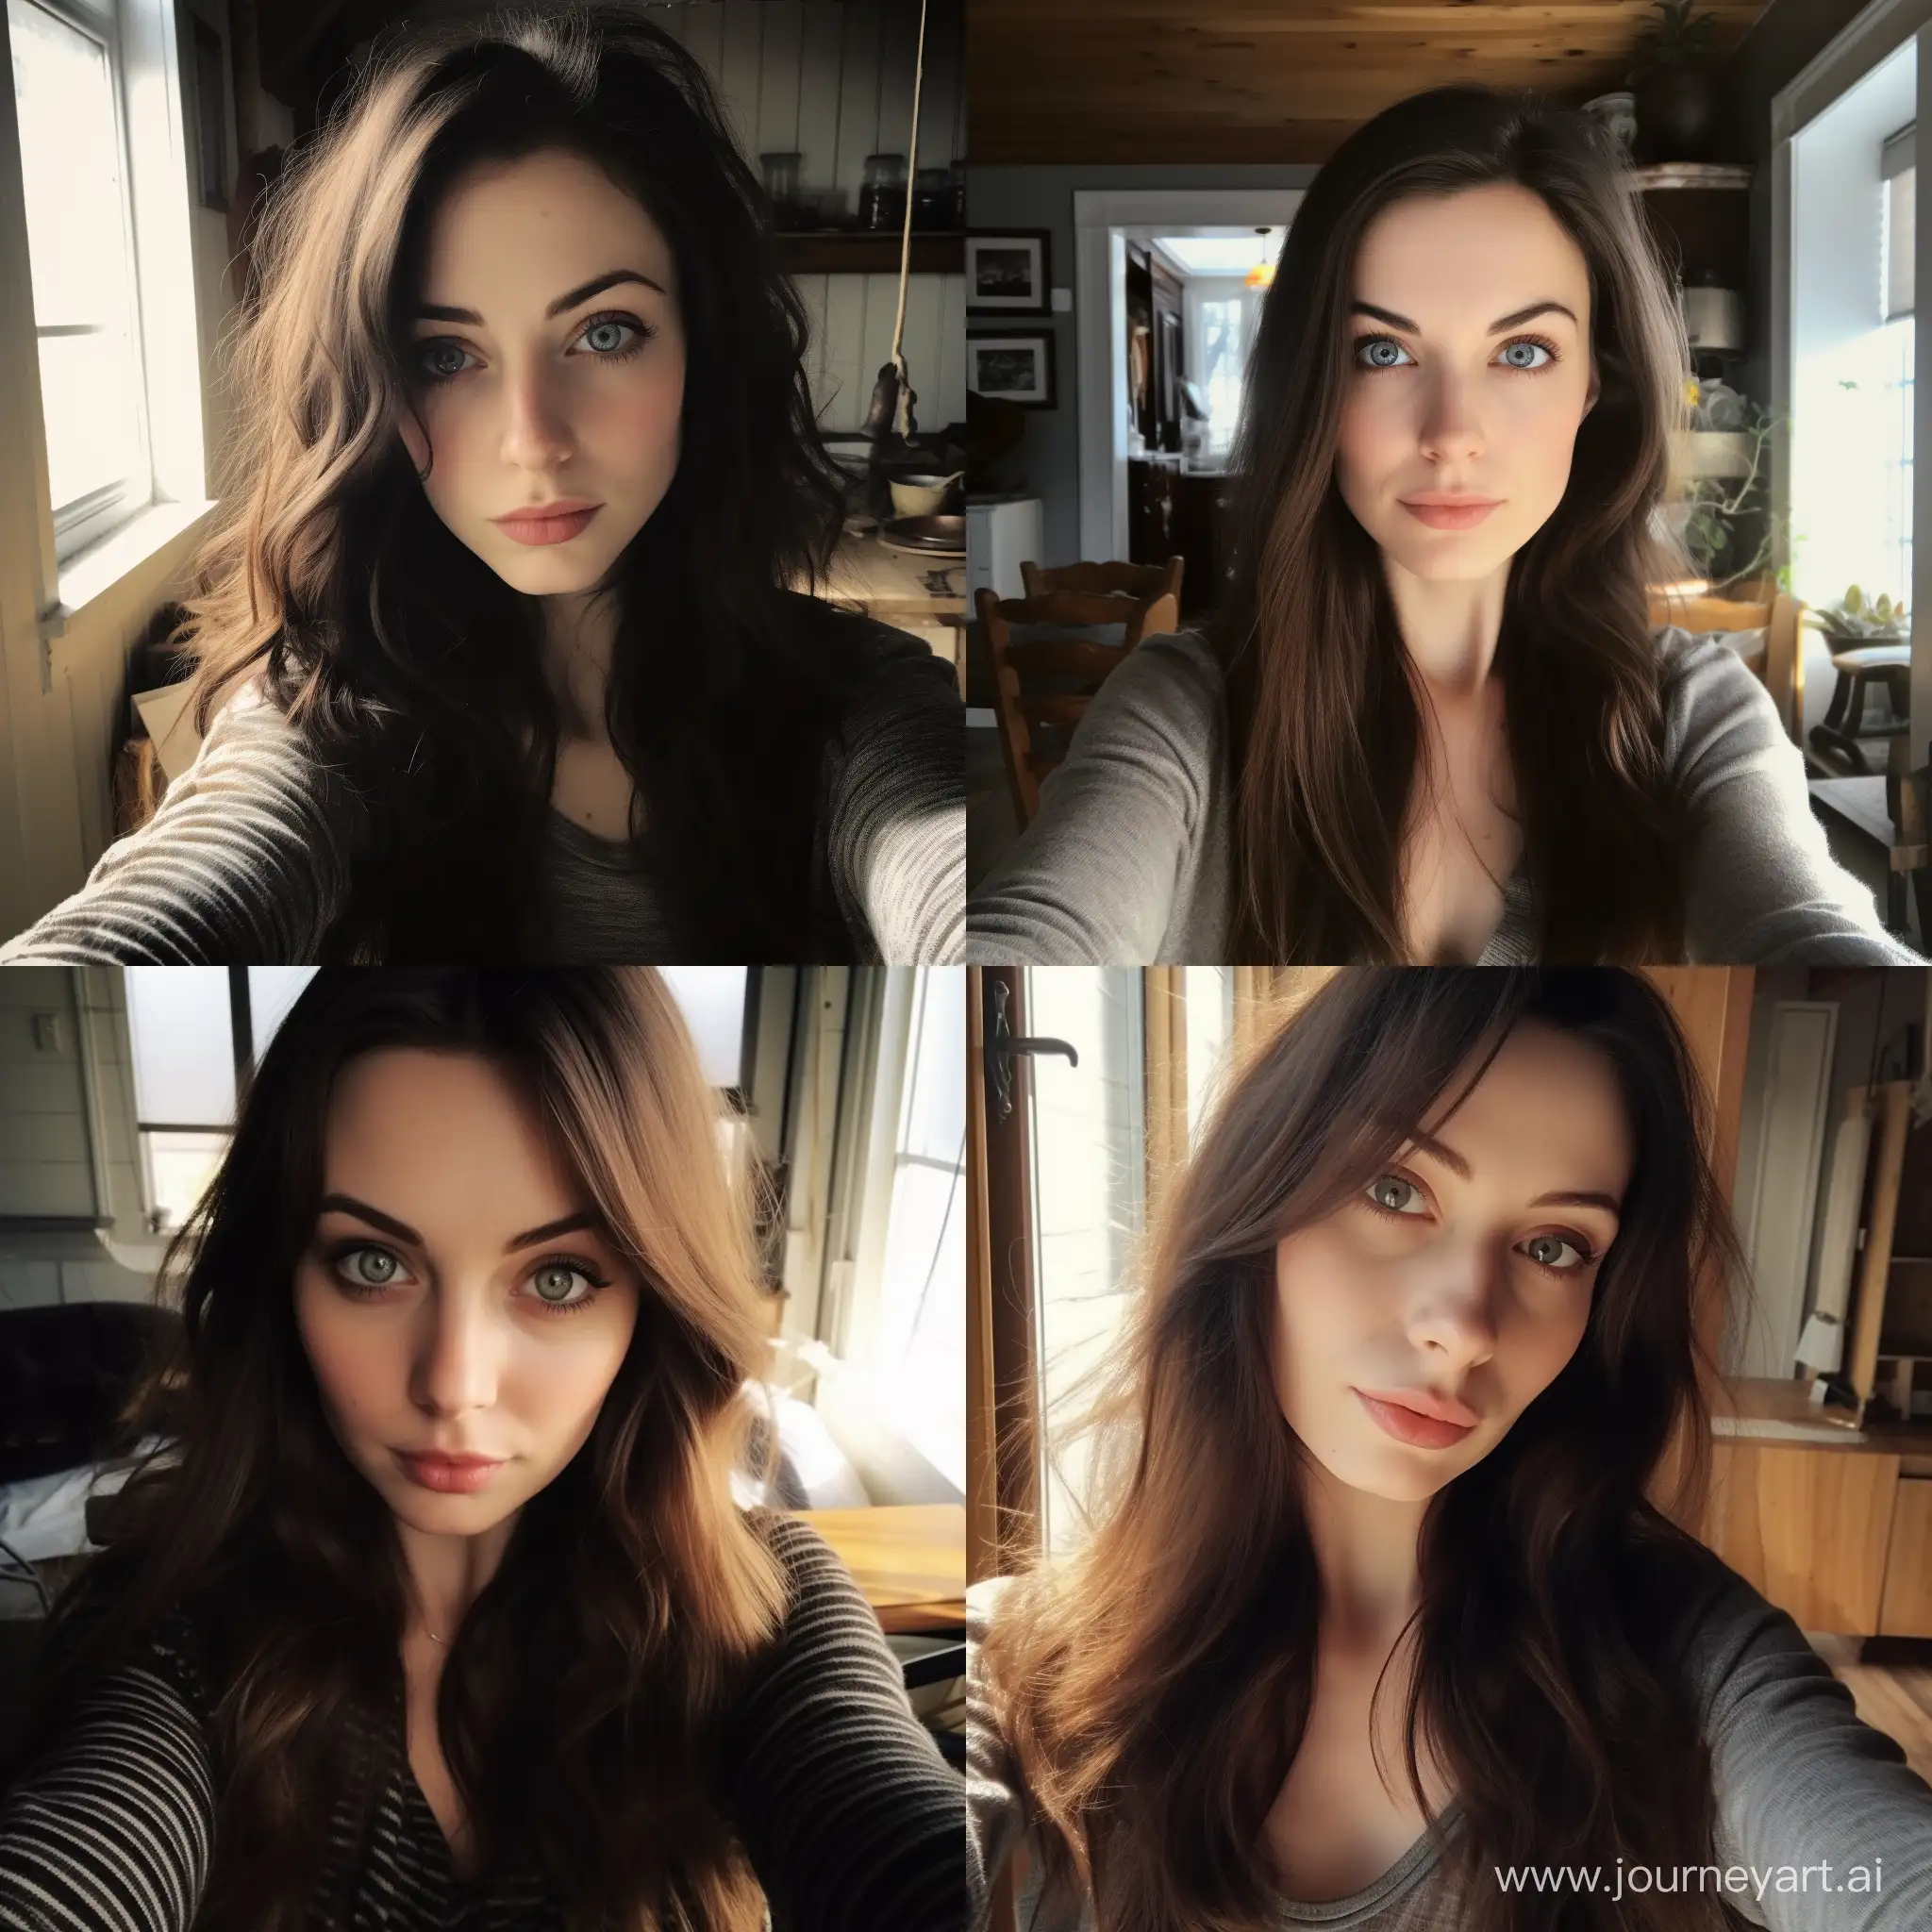 Brunette-Woman-with-Wide-Eyes-and-Round-Face-LowQuality-Phone-Selfie